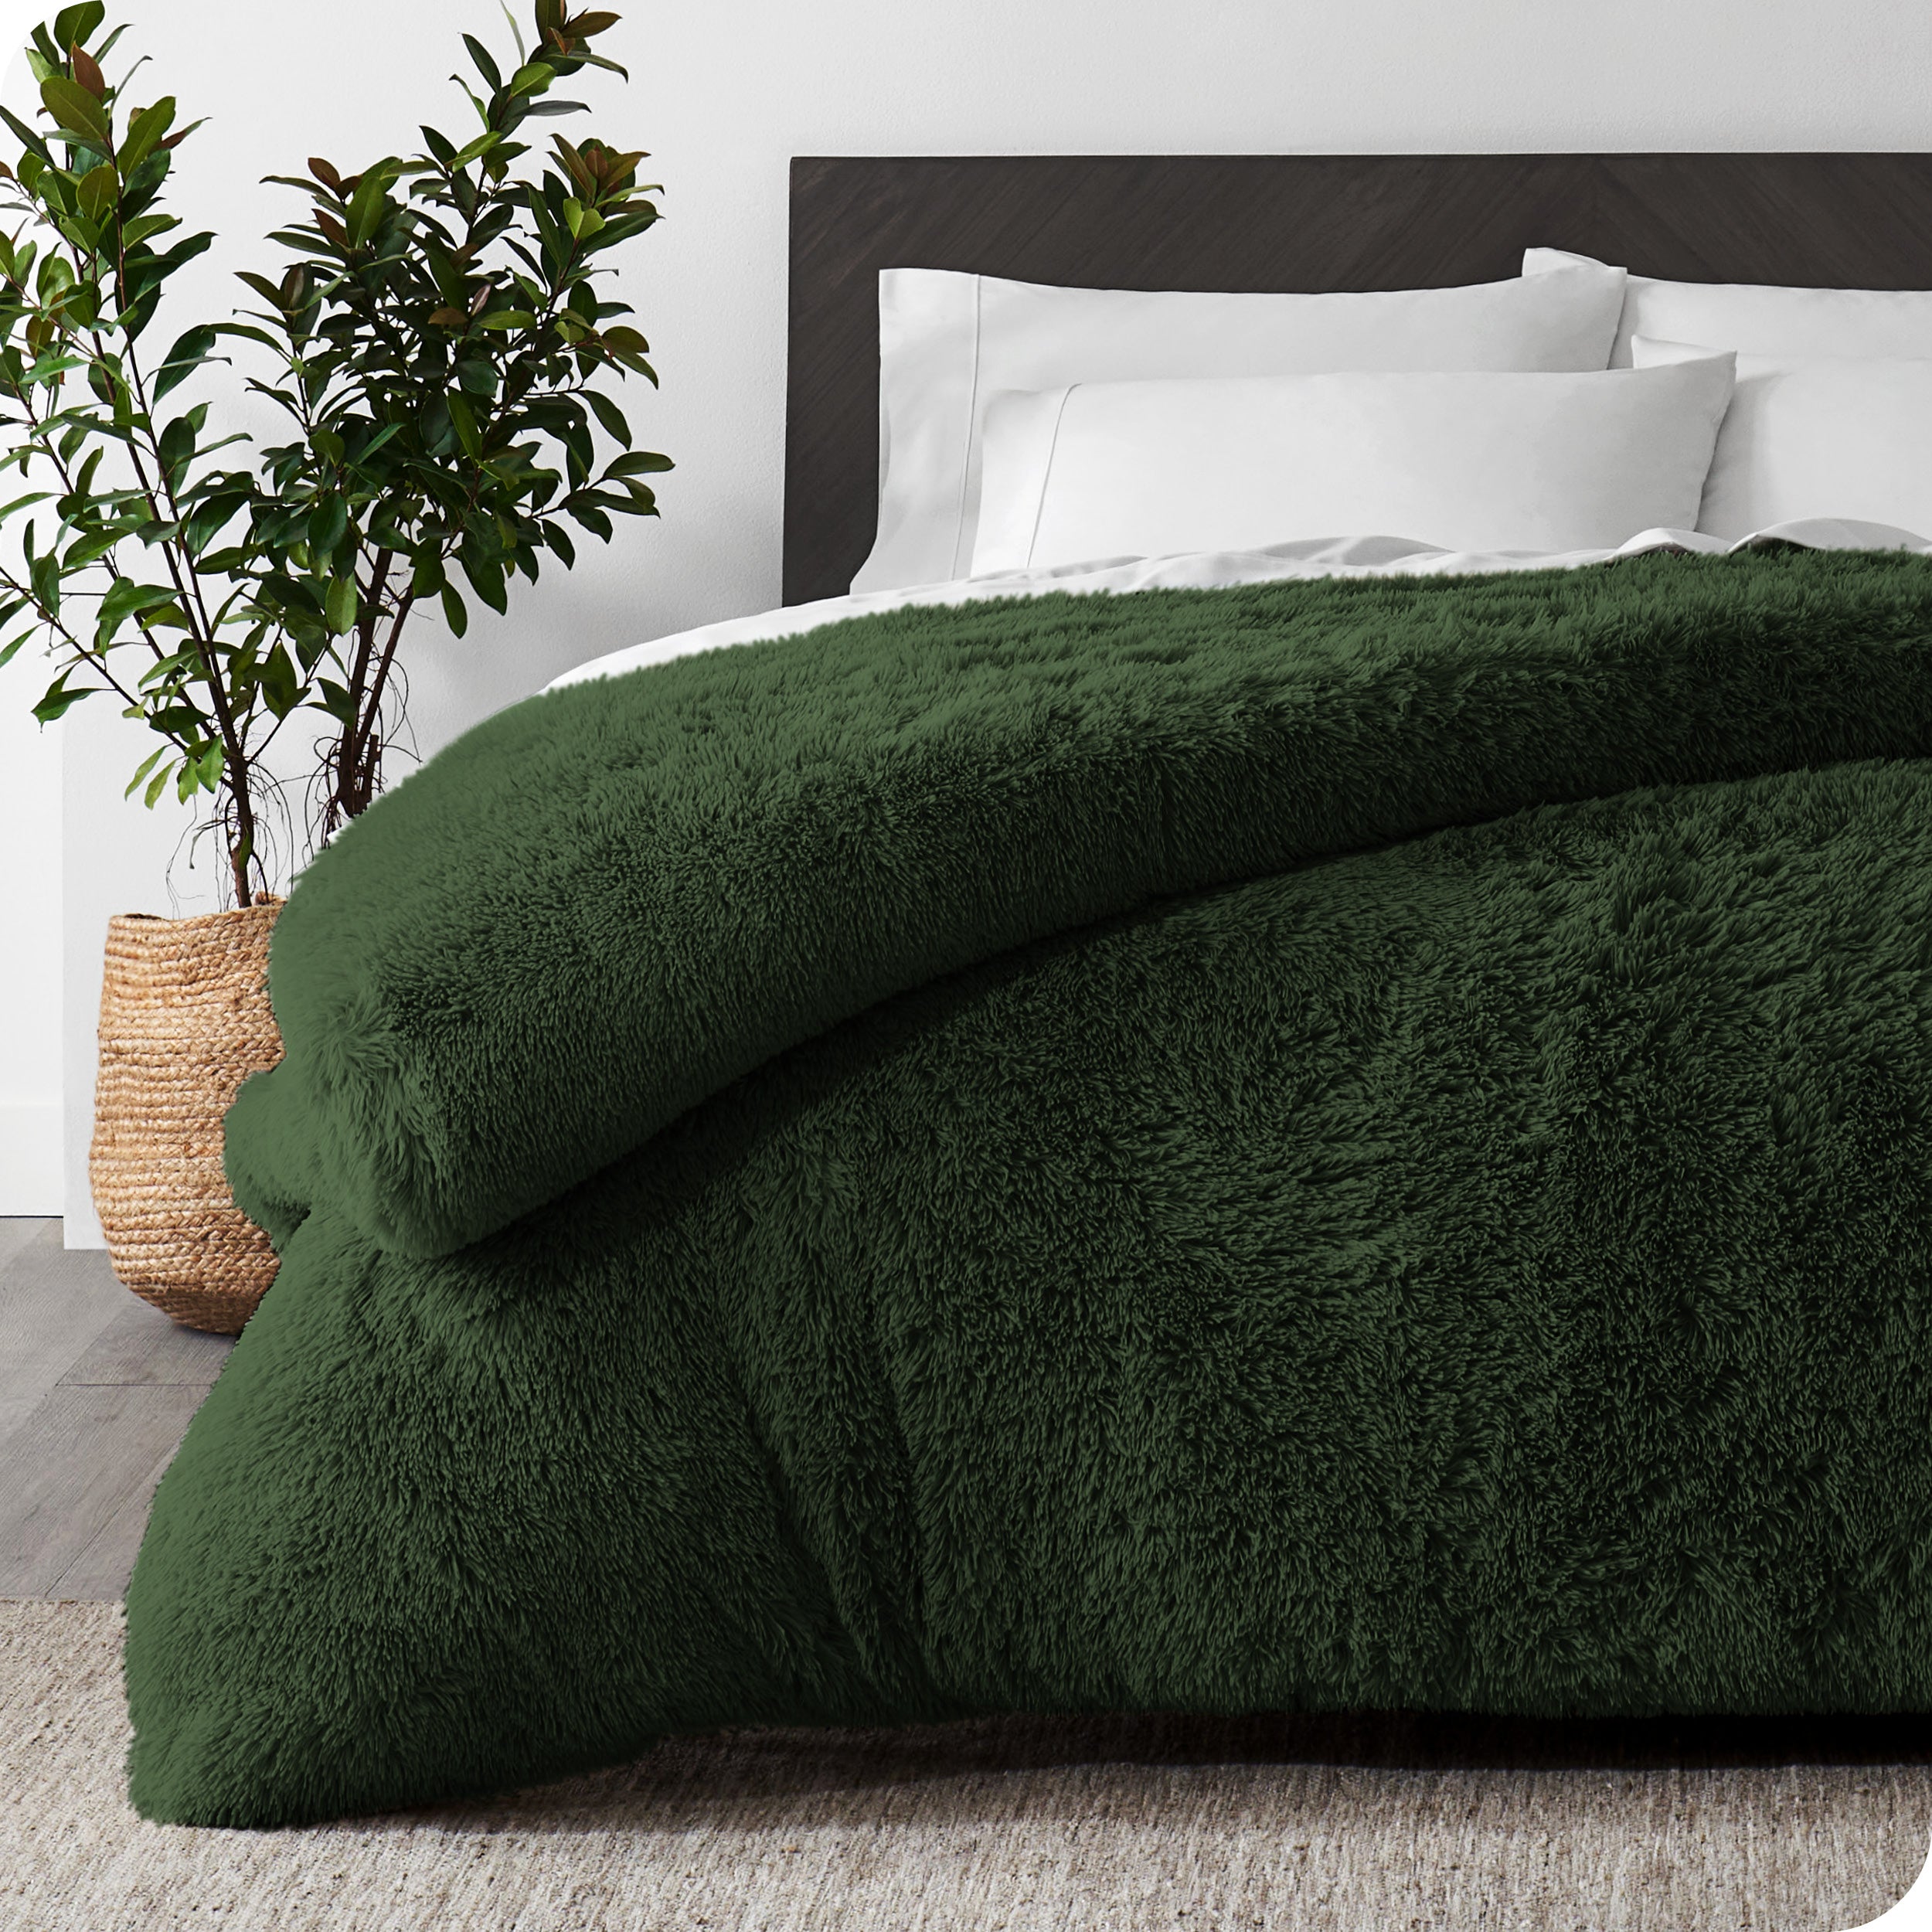 A forest green shaggy duvet cover on a bed with white sheets and pillowcases. A large plant is next to the bed.